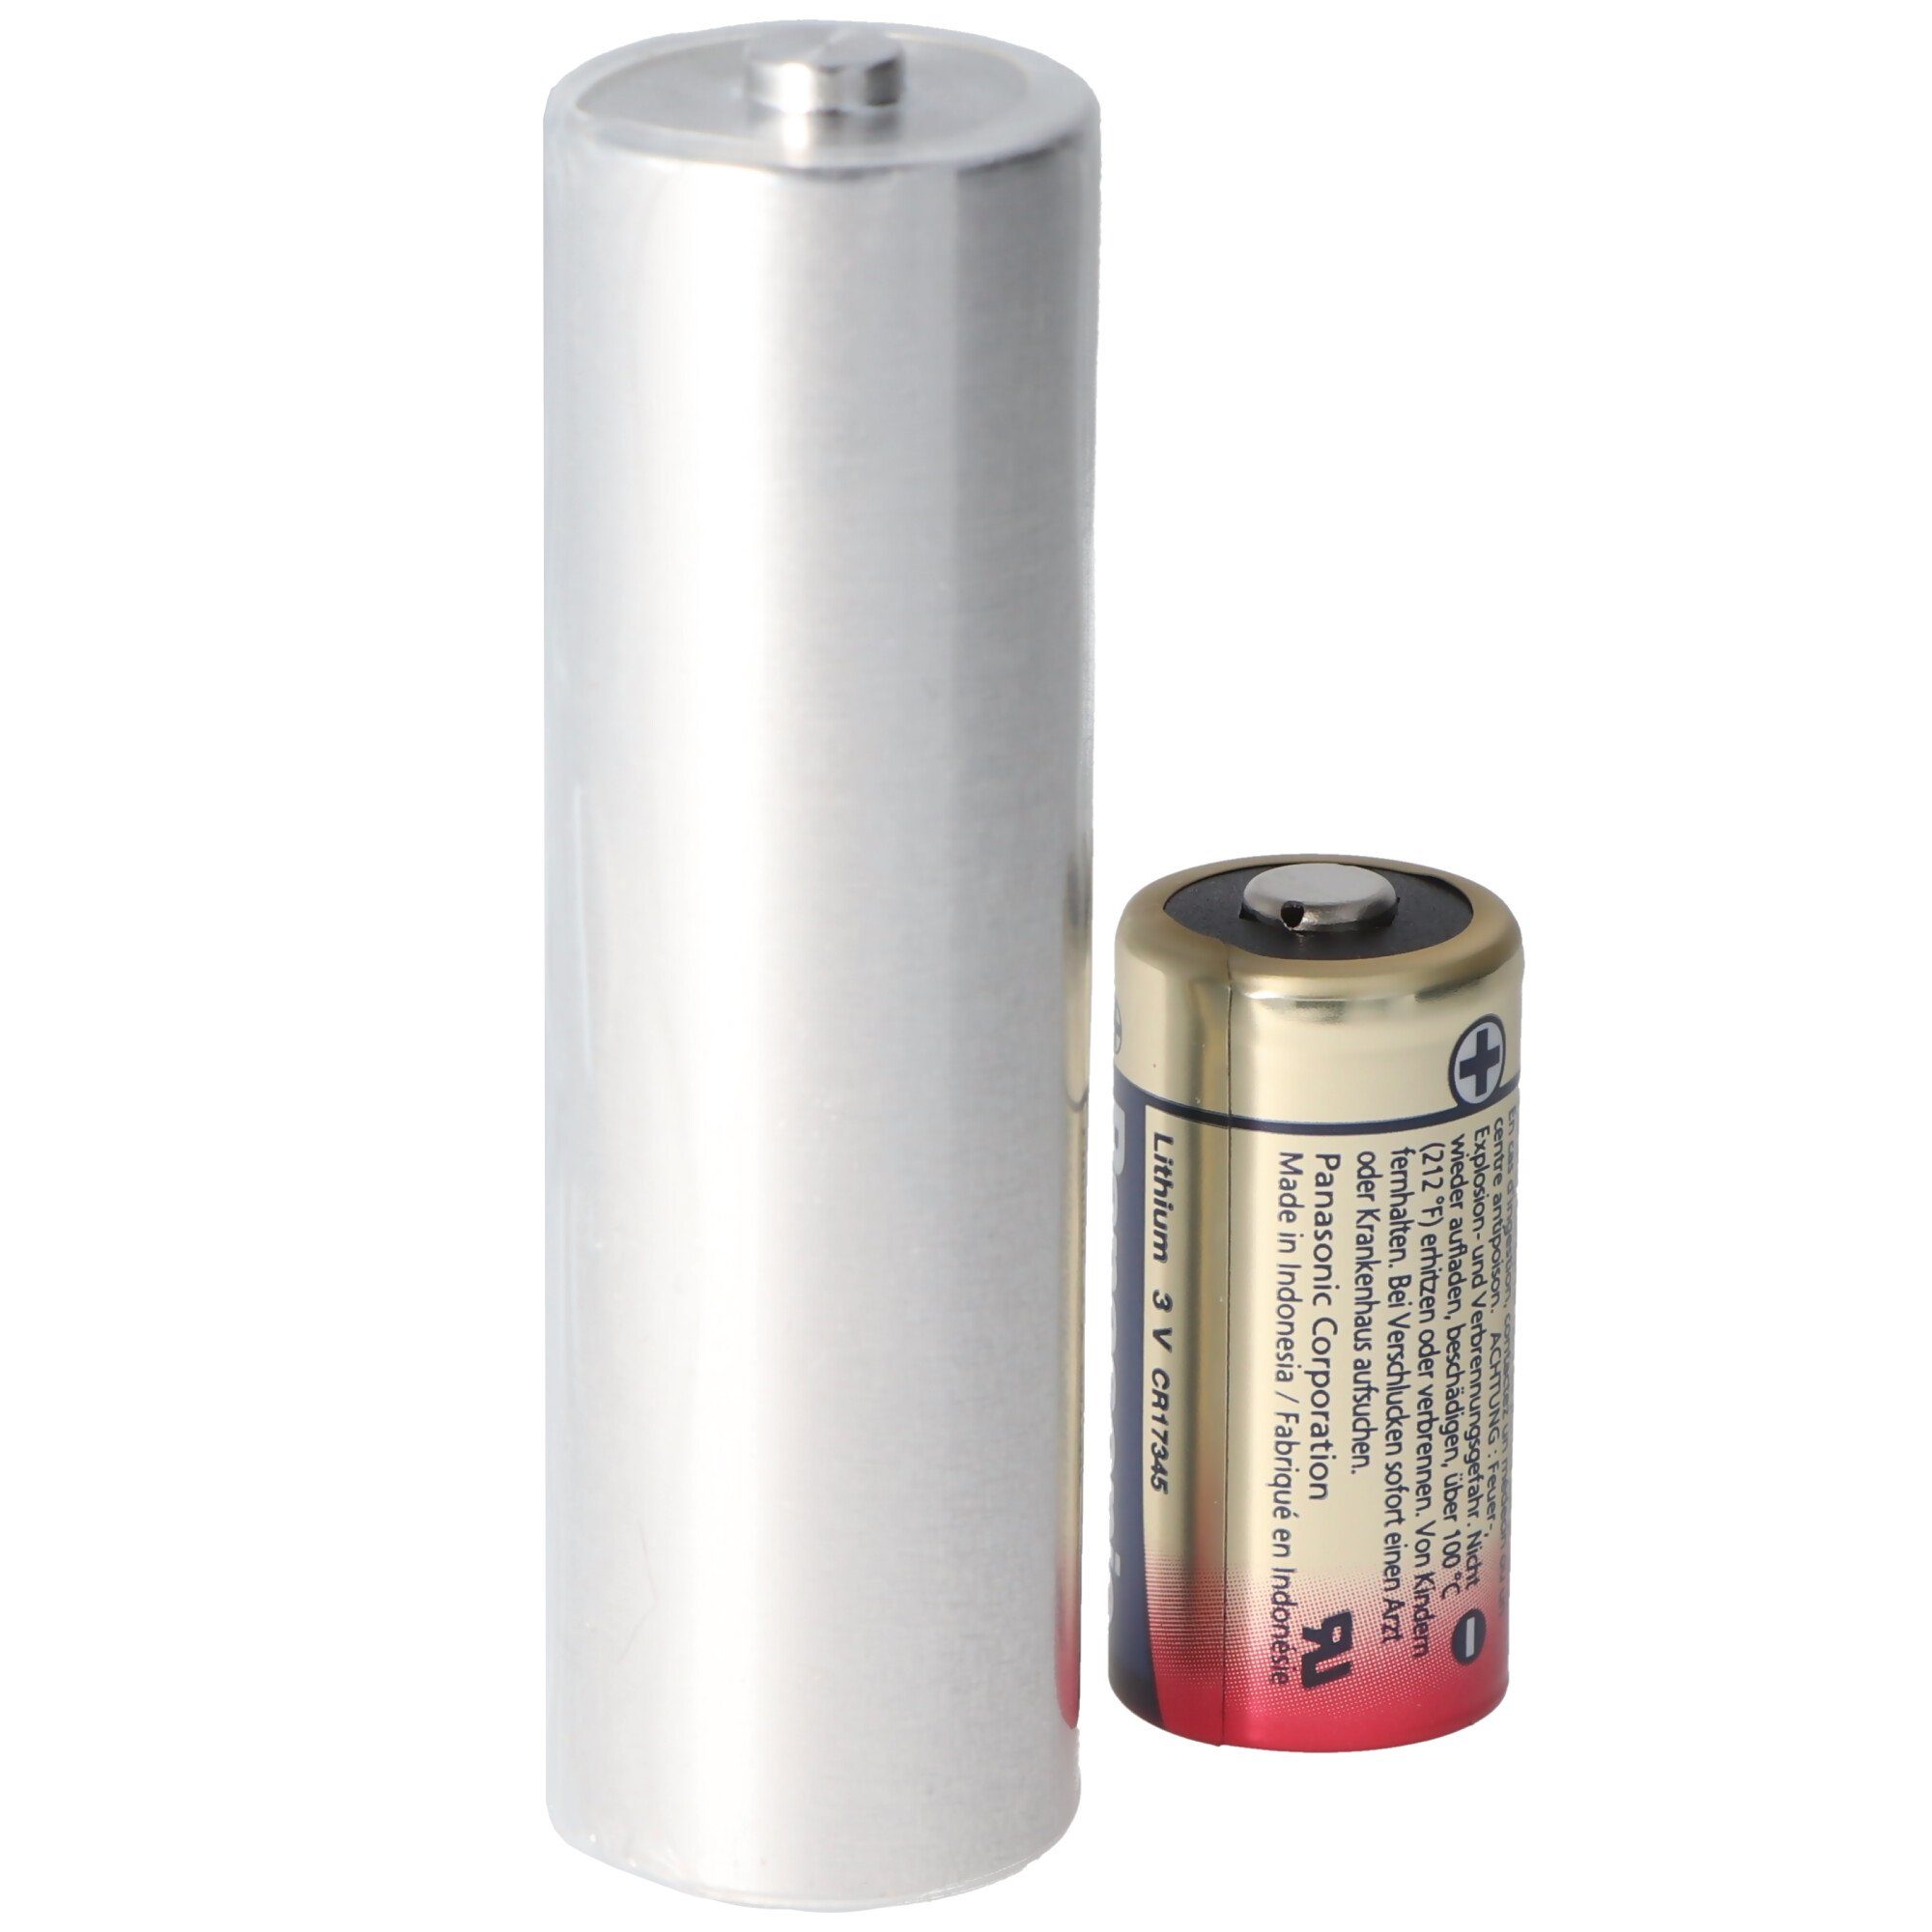 Batterie 3010, Duplex 3,0 Vo AccuCell 2010, Stab-Batterie, 2R10 Batterie 2R10R, Adapter